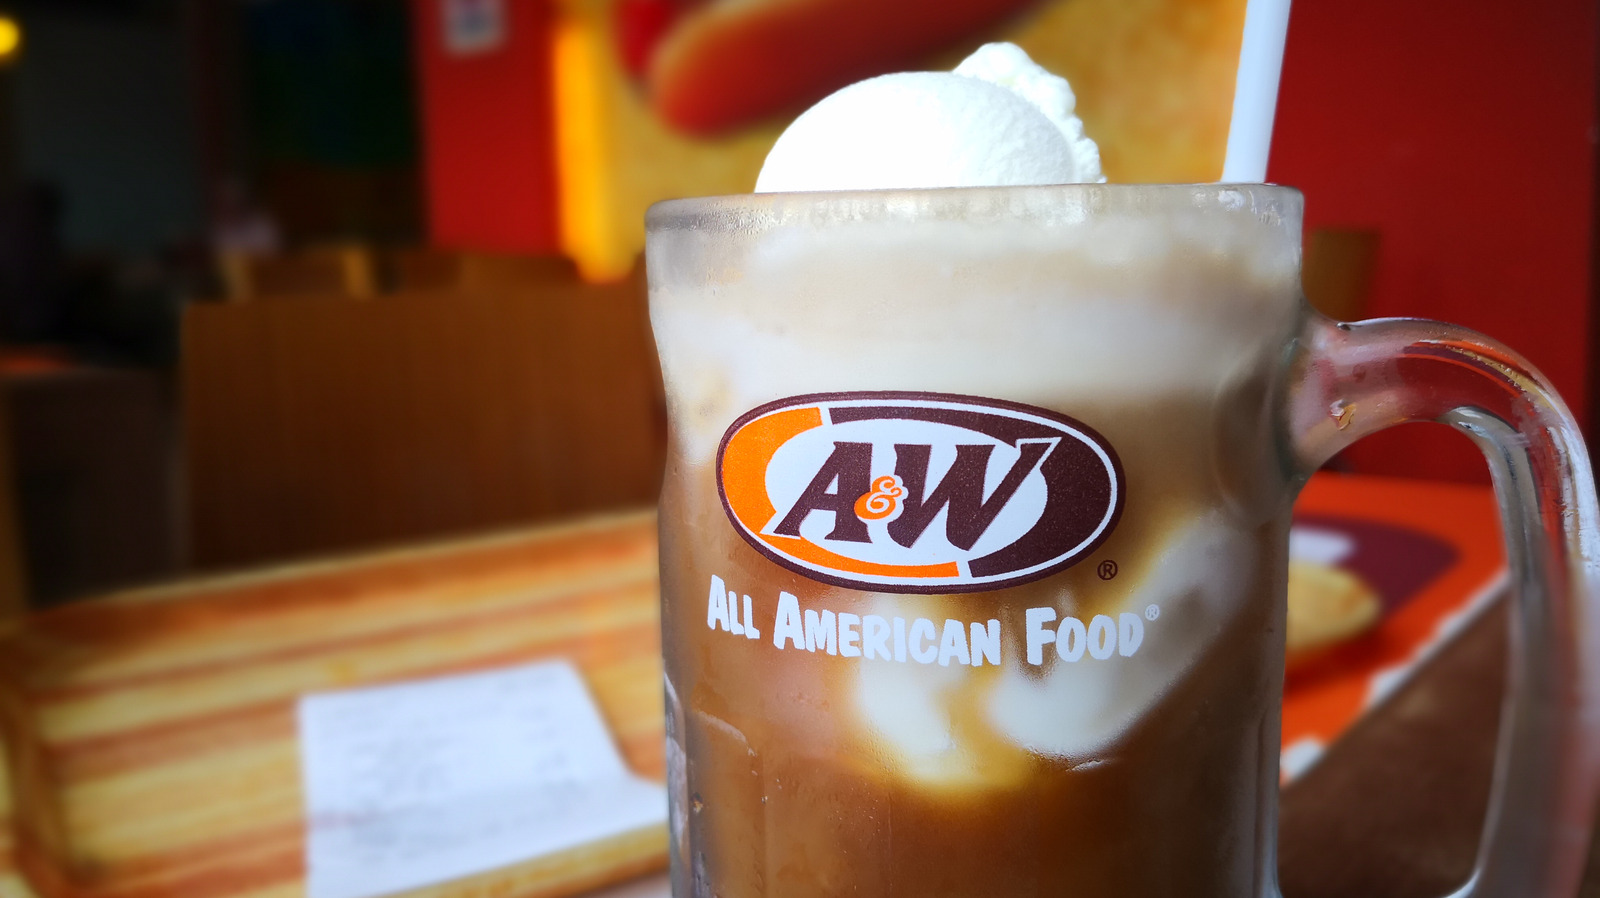 What The Letters In A&W Really Stand For